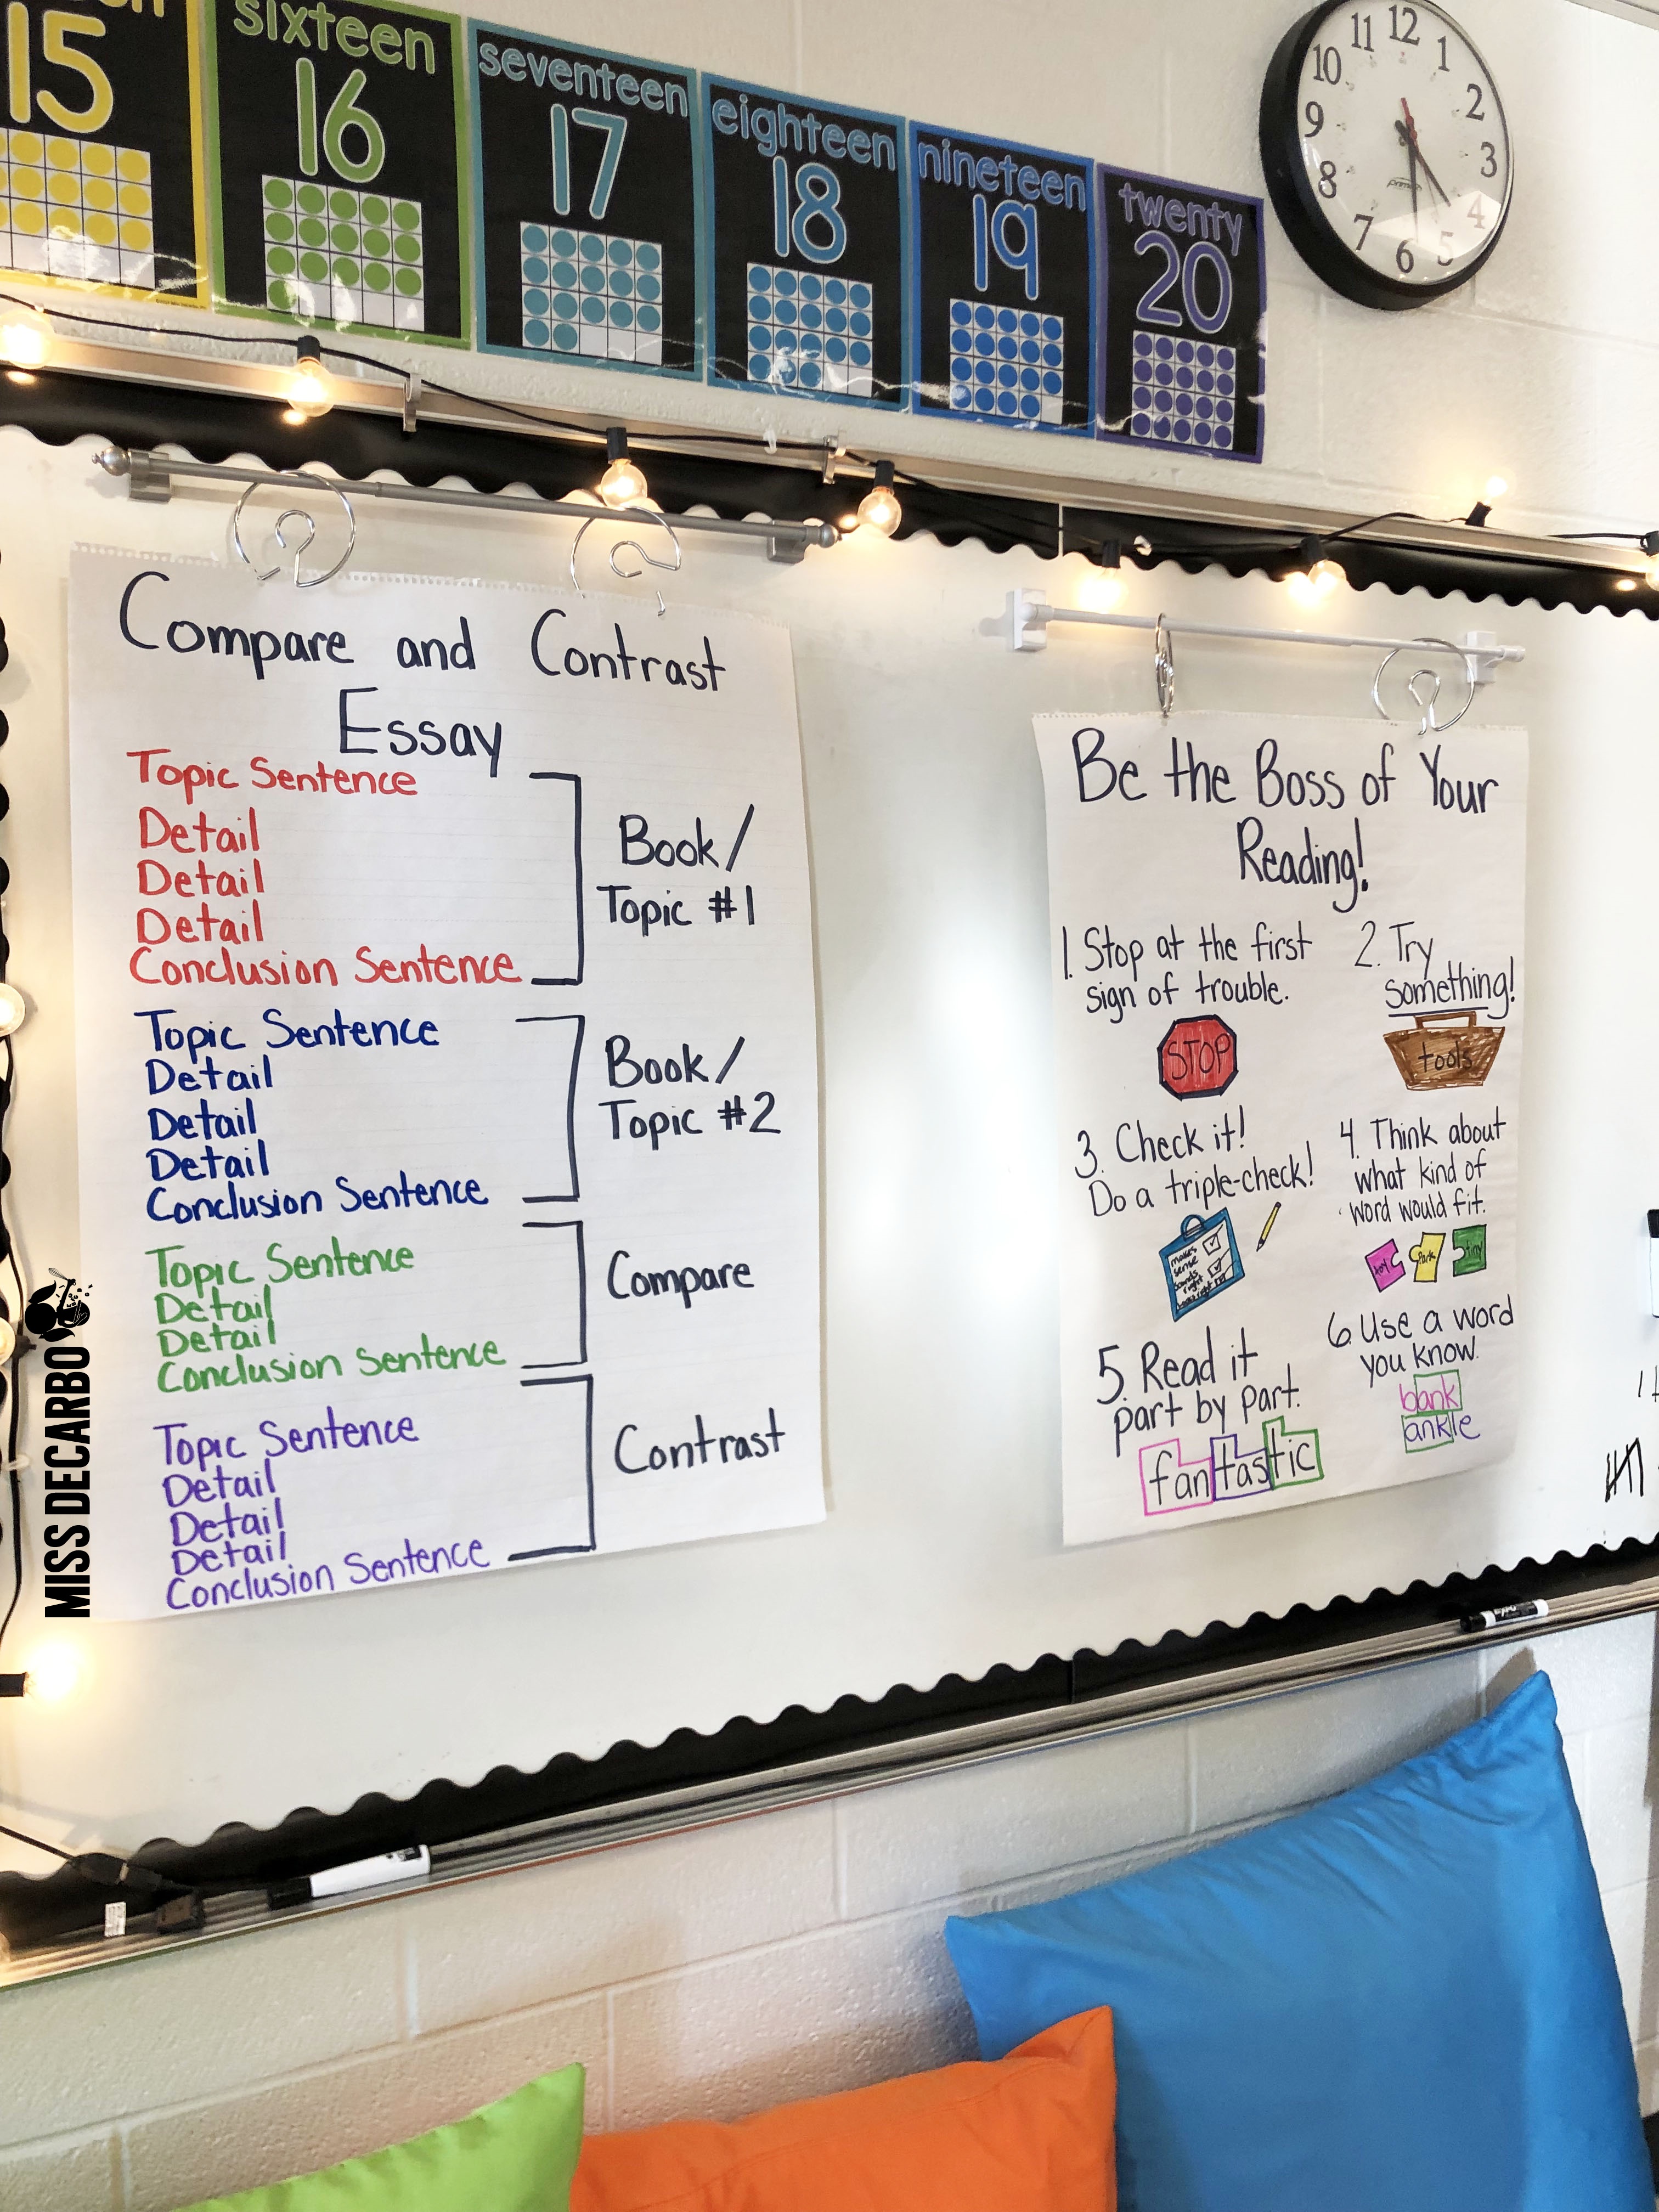 Learn how to use magnetic curtain rods to display anchor charts and posters for easier classroom organization!